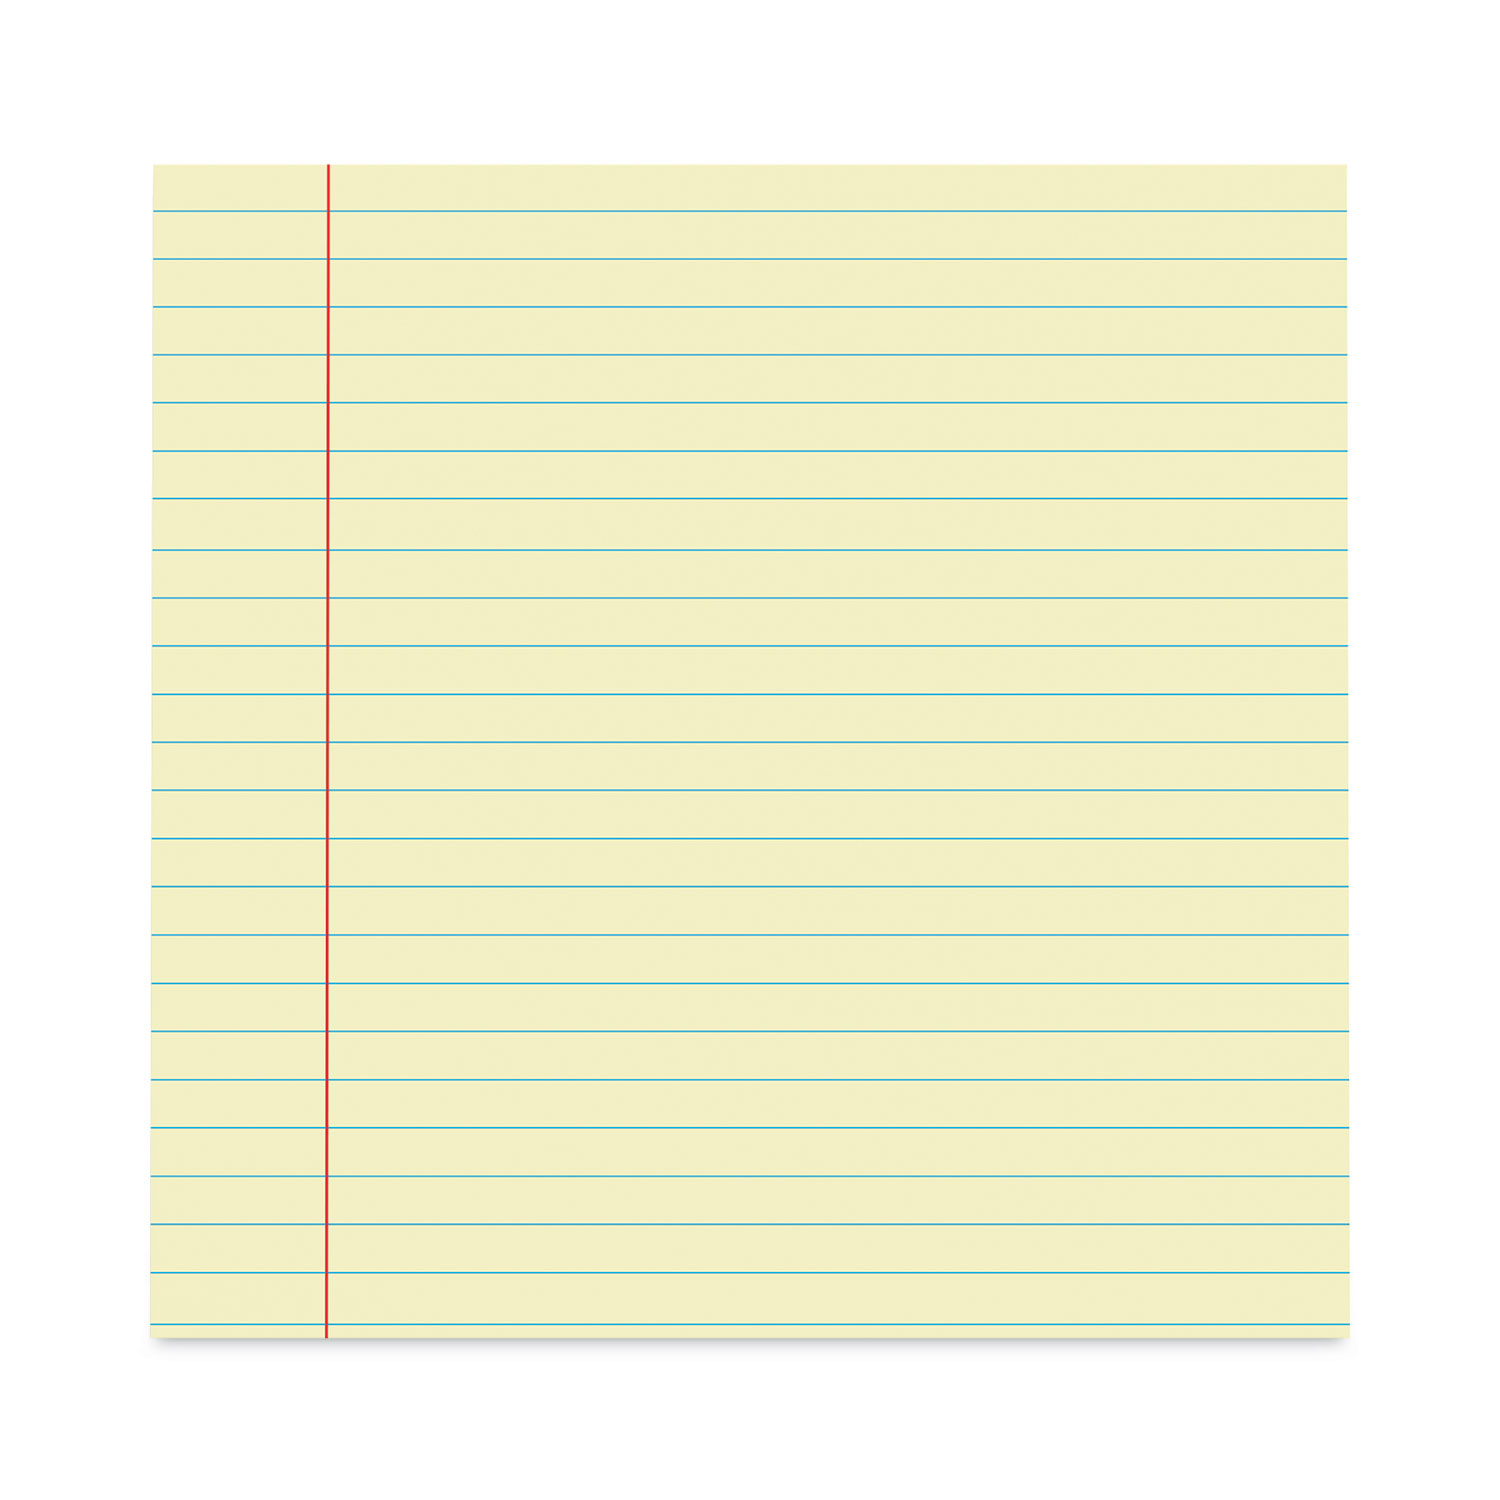 TOPS Legal Notepad, 8.5 x 11.75, Wide Ruled, Canary Yellow, 50 Sheets/Pad,  12 Pads/Pack (TOP 75351)